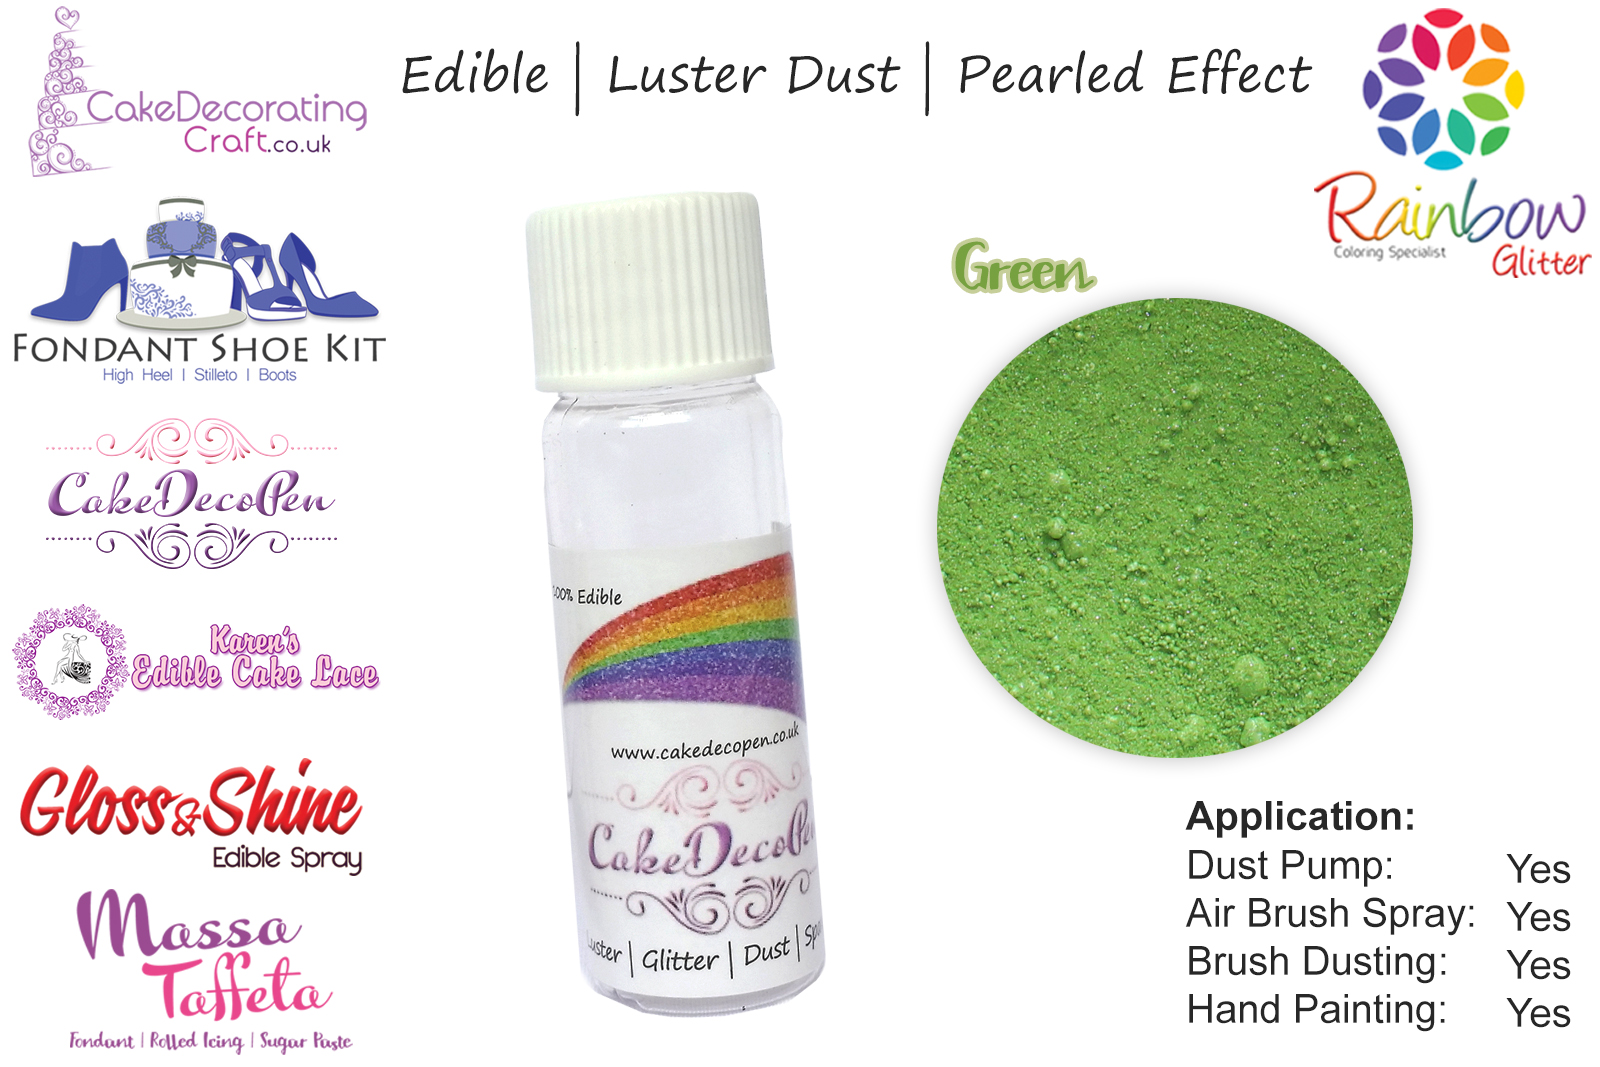 Green | 4 Gram Tube | Luster Dust | Pearled Effect | For Cake Decorating | Christmas Edible Decorating Essential